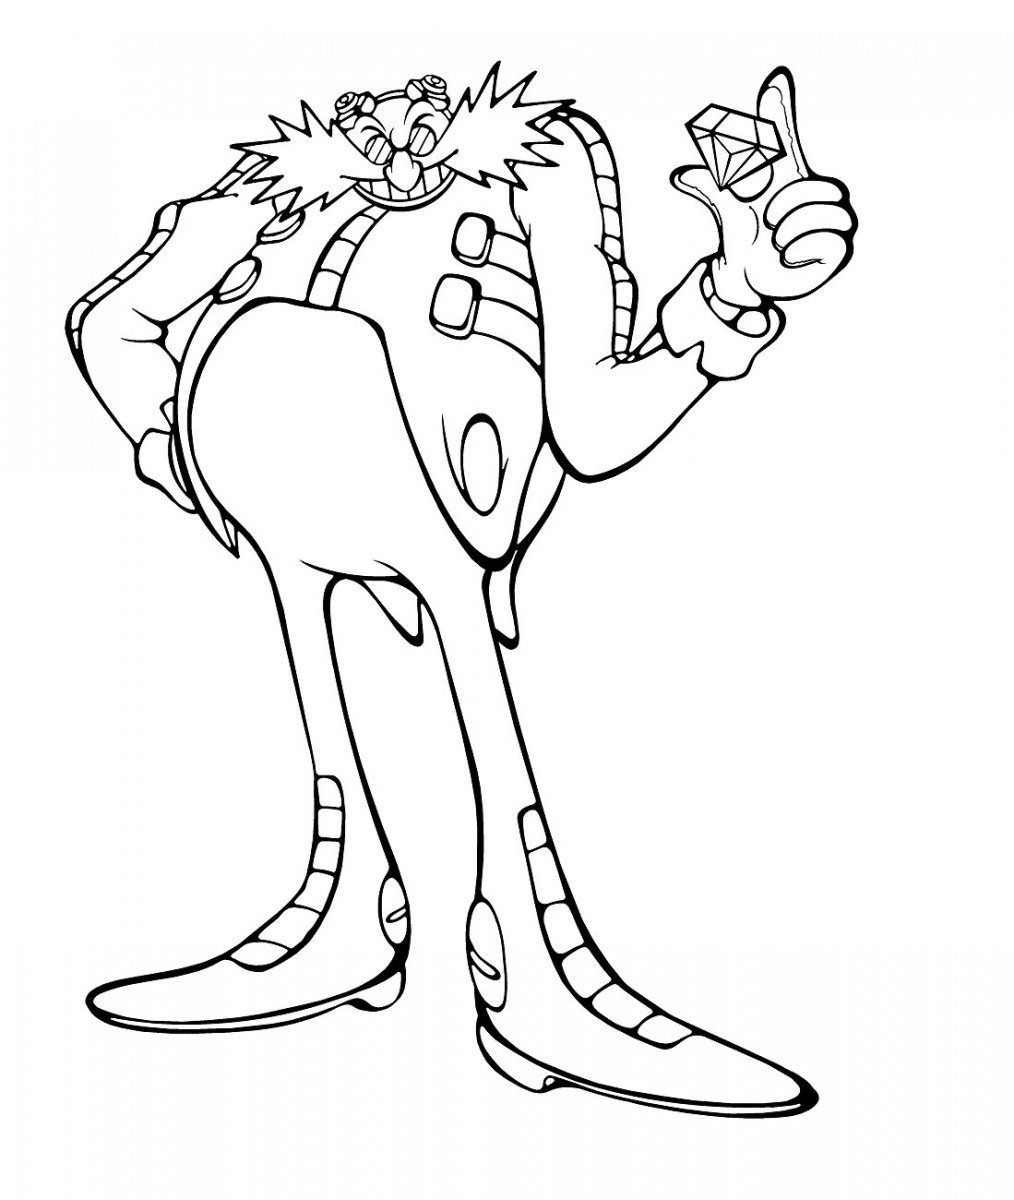 Download Doctor Eggman With Diamonds Coloring Page - Free Printable ...